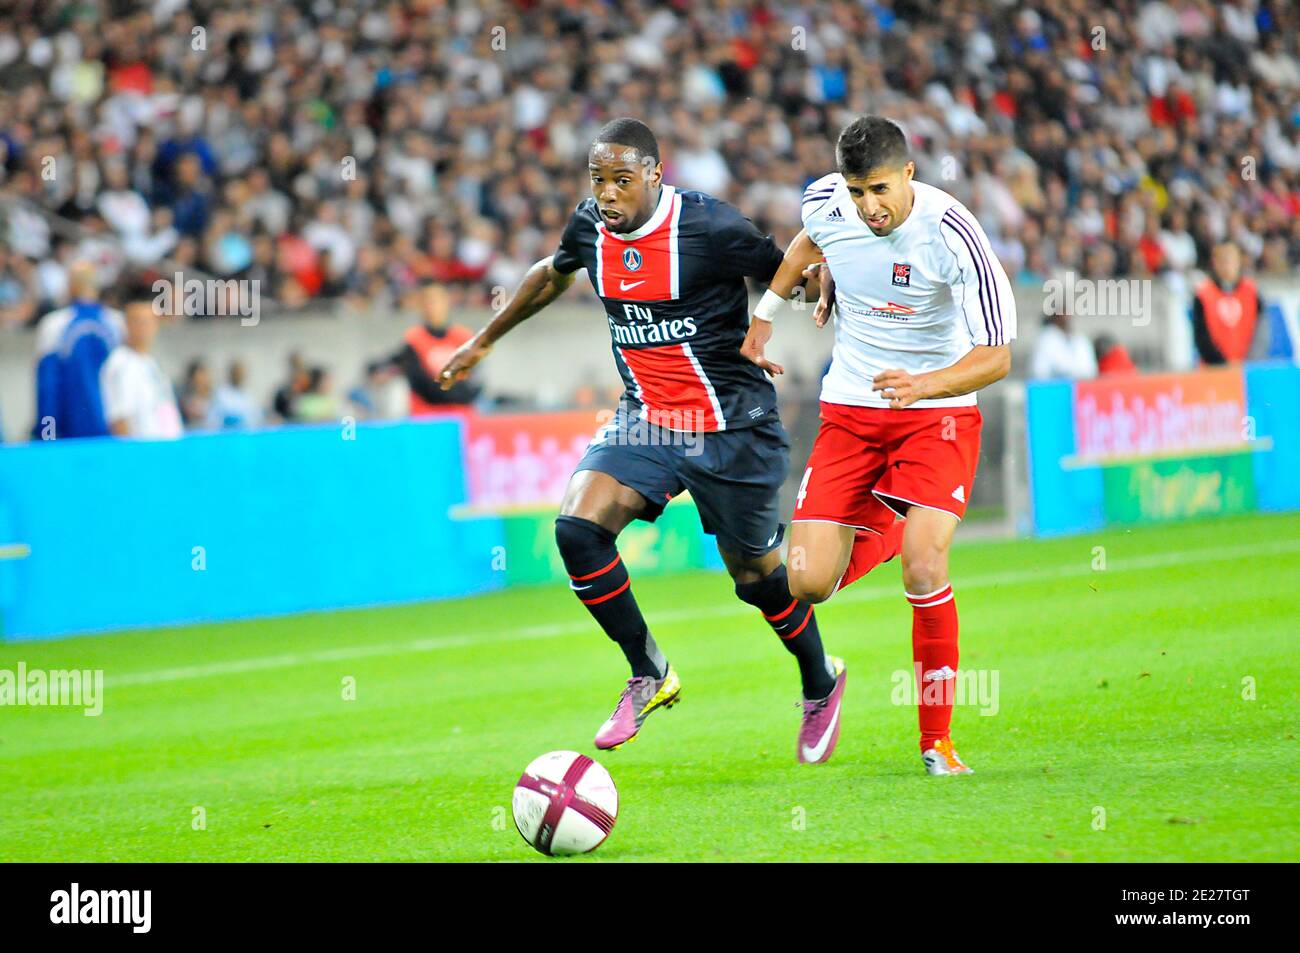 PSG's Jean-Eude Maurice fights for the ball during the UEFA Europa League  Playoffs soccer match, Paris Saint-Germain vs Differdange, Second Leg, at  the Parc des Princes in Paris, France on August 25,